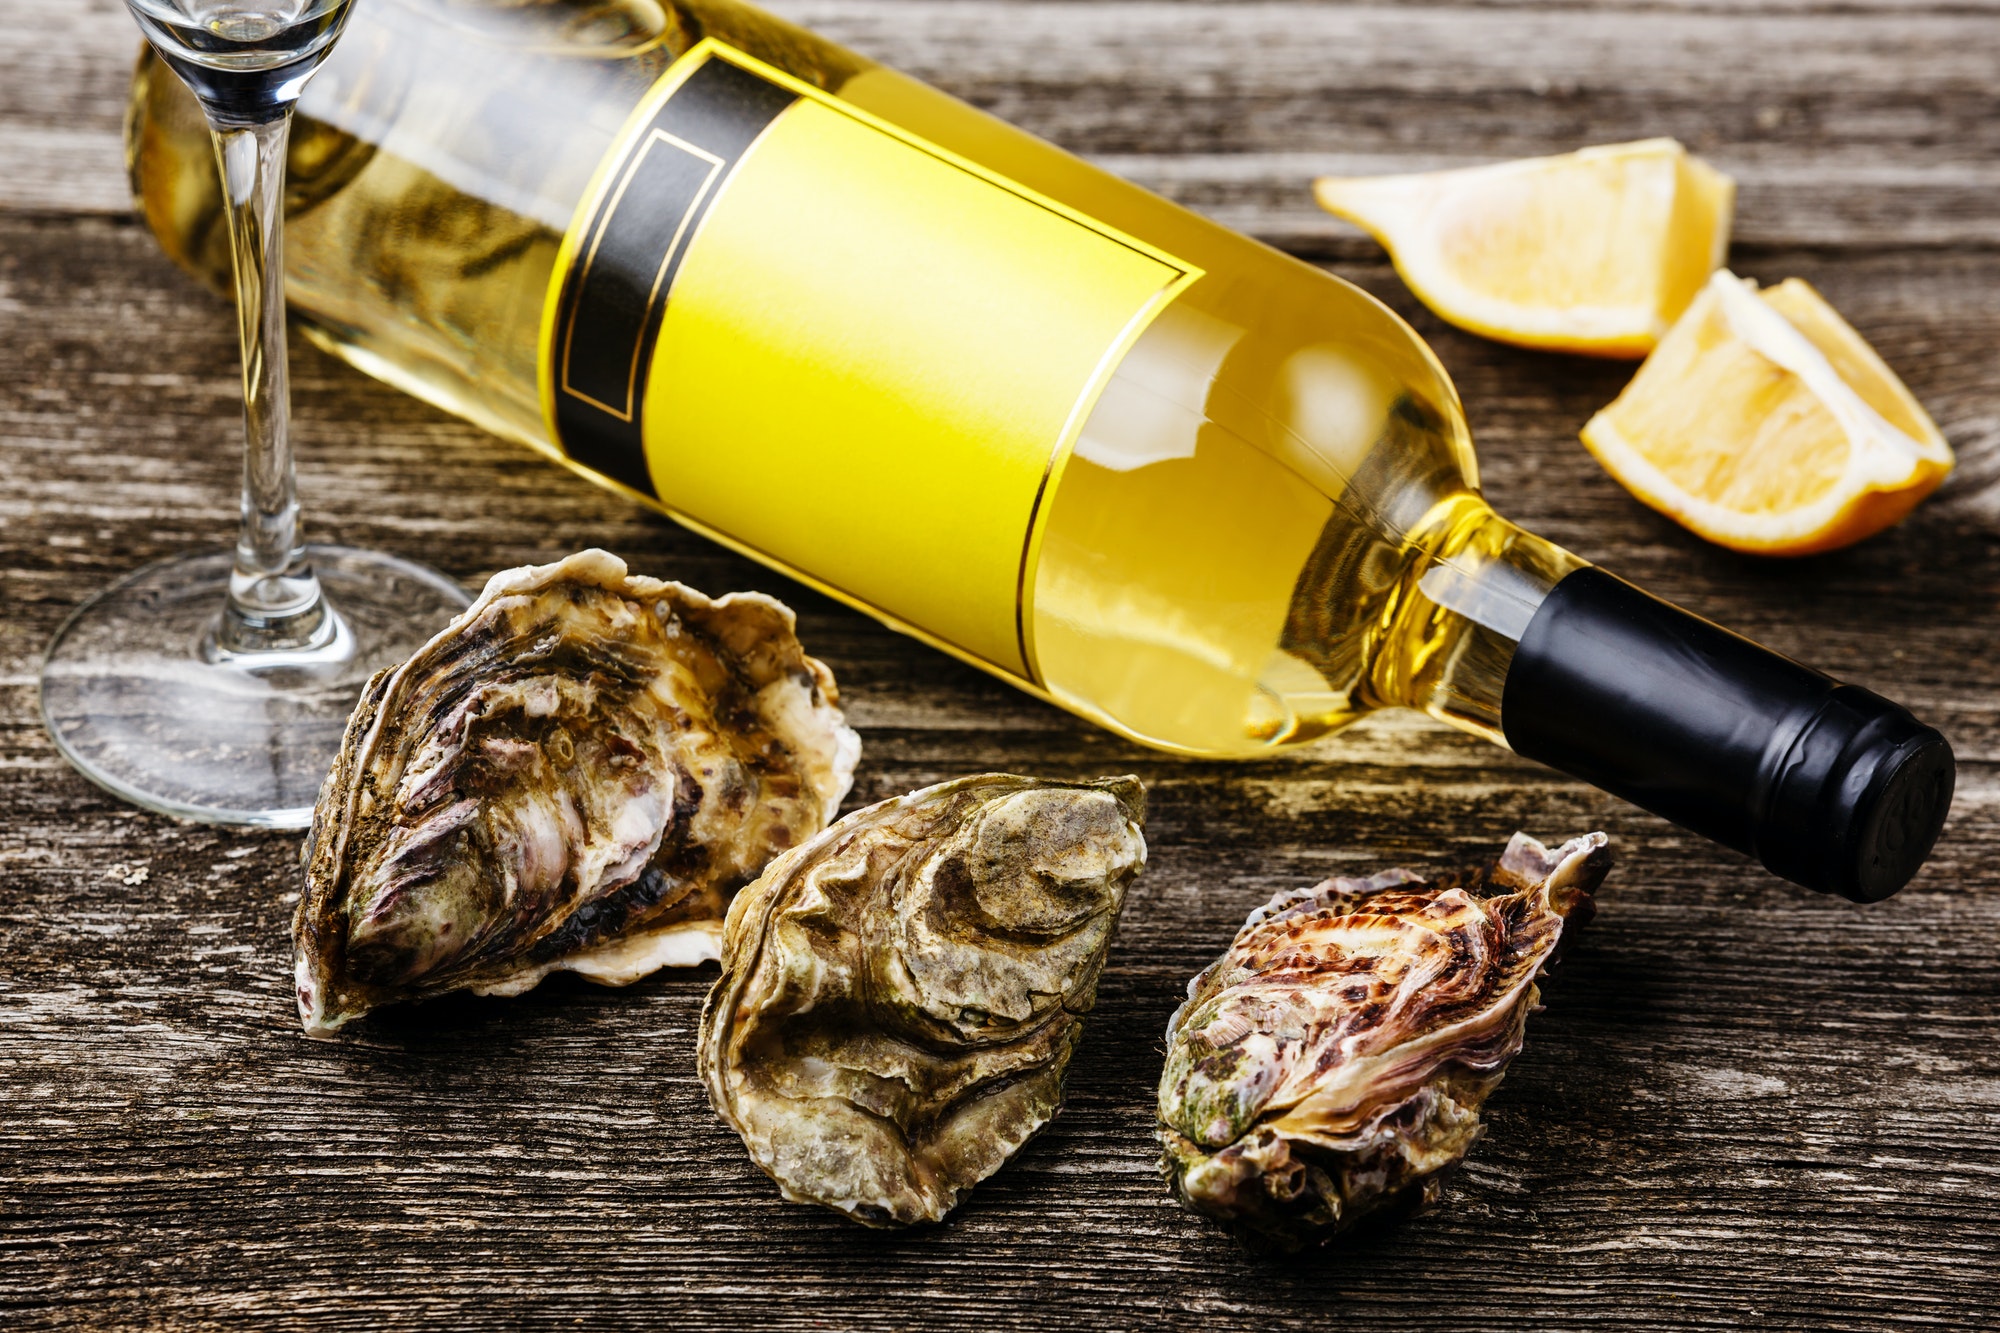 Oysters and bottle of wine on gray wooden background